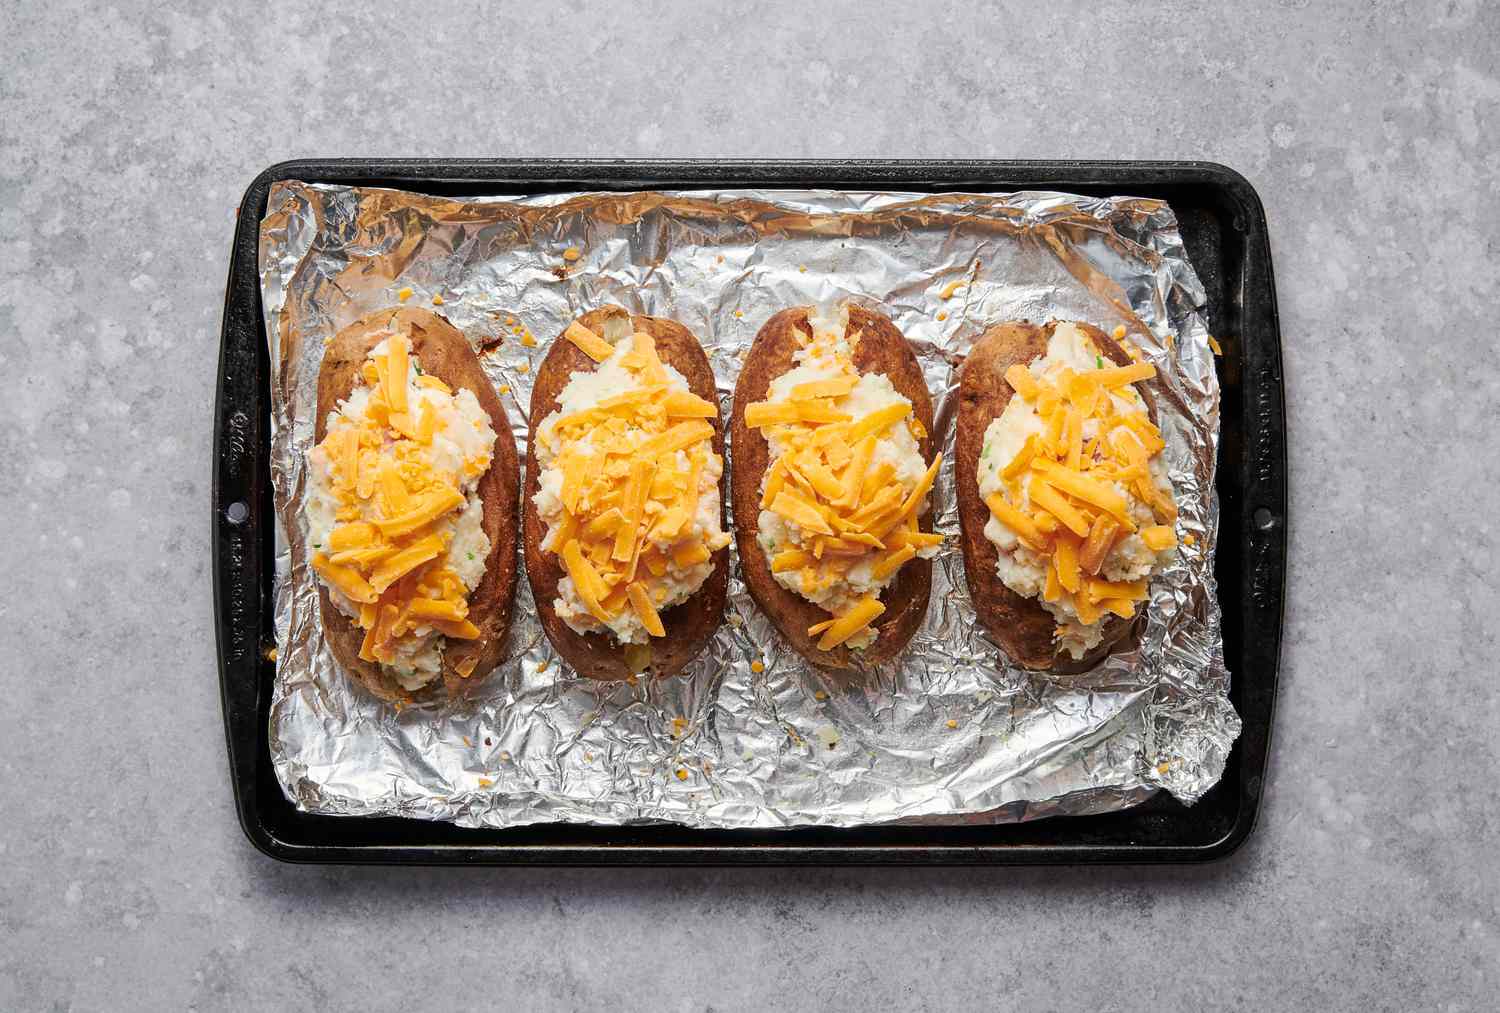 https://recipes.net/wp-content/uploads/2023/12/how-to-cook-baked-potatoes-in-foil-in-the-oven-1702915510.jpg